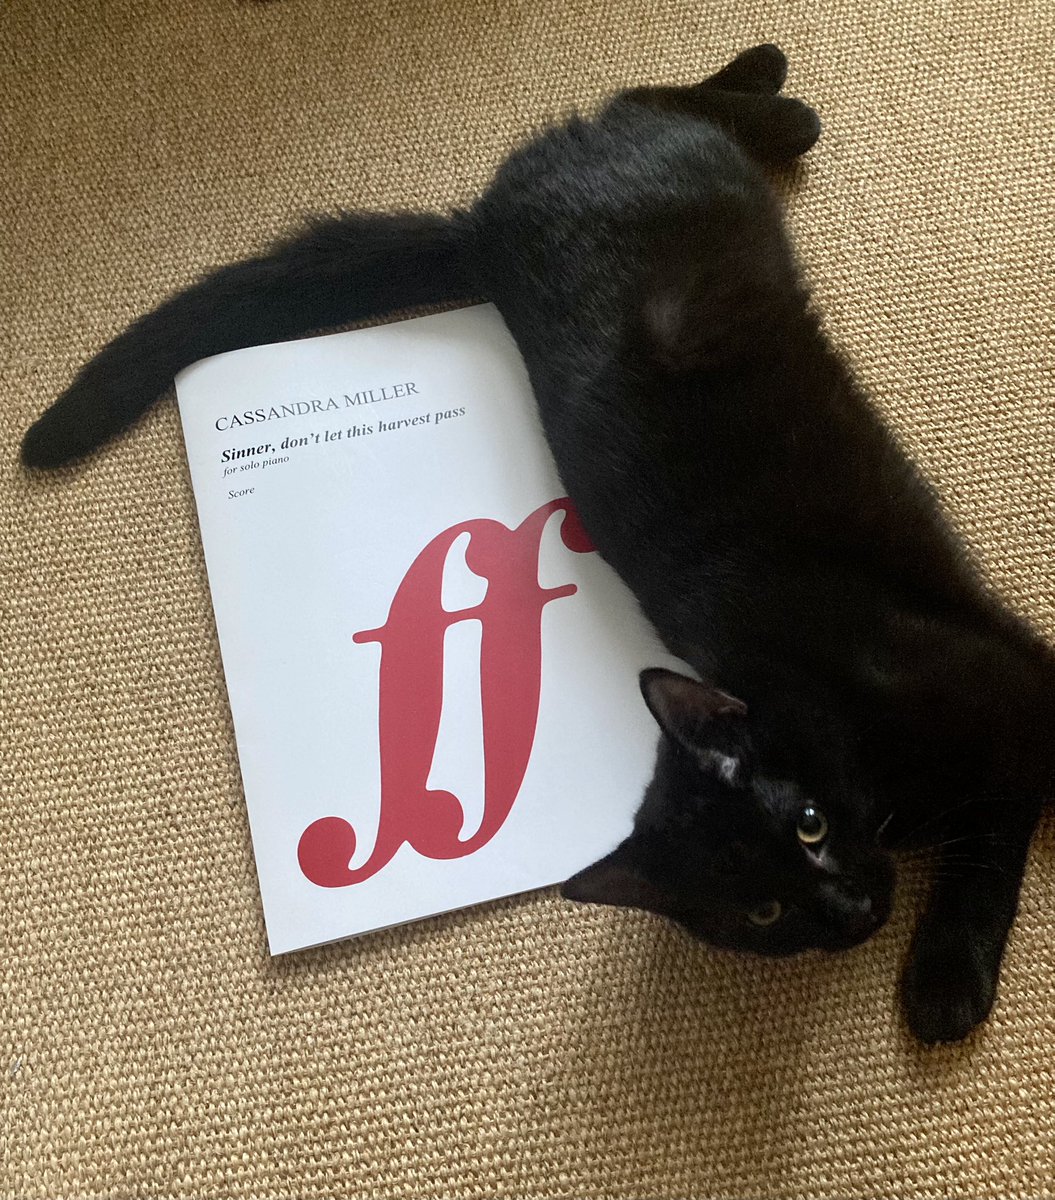 Thank you for my gift #cassandramiller and @Fabercomposers (cat not included)